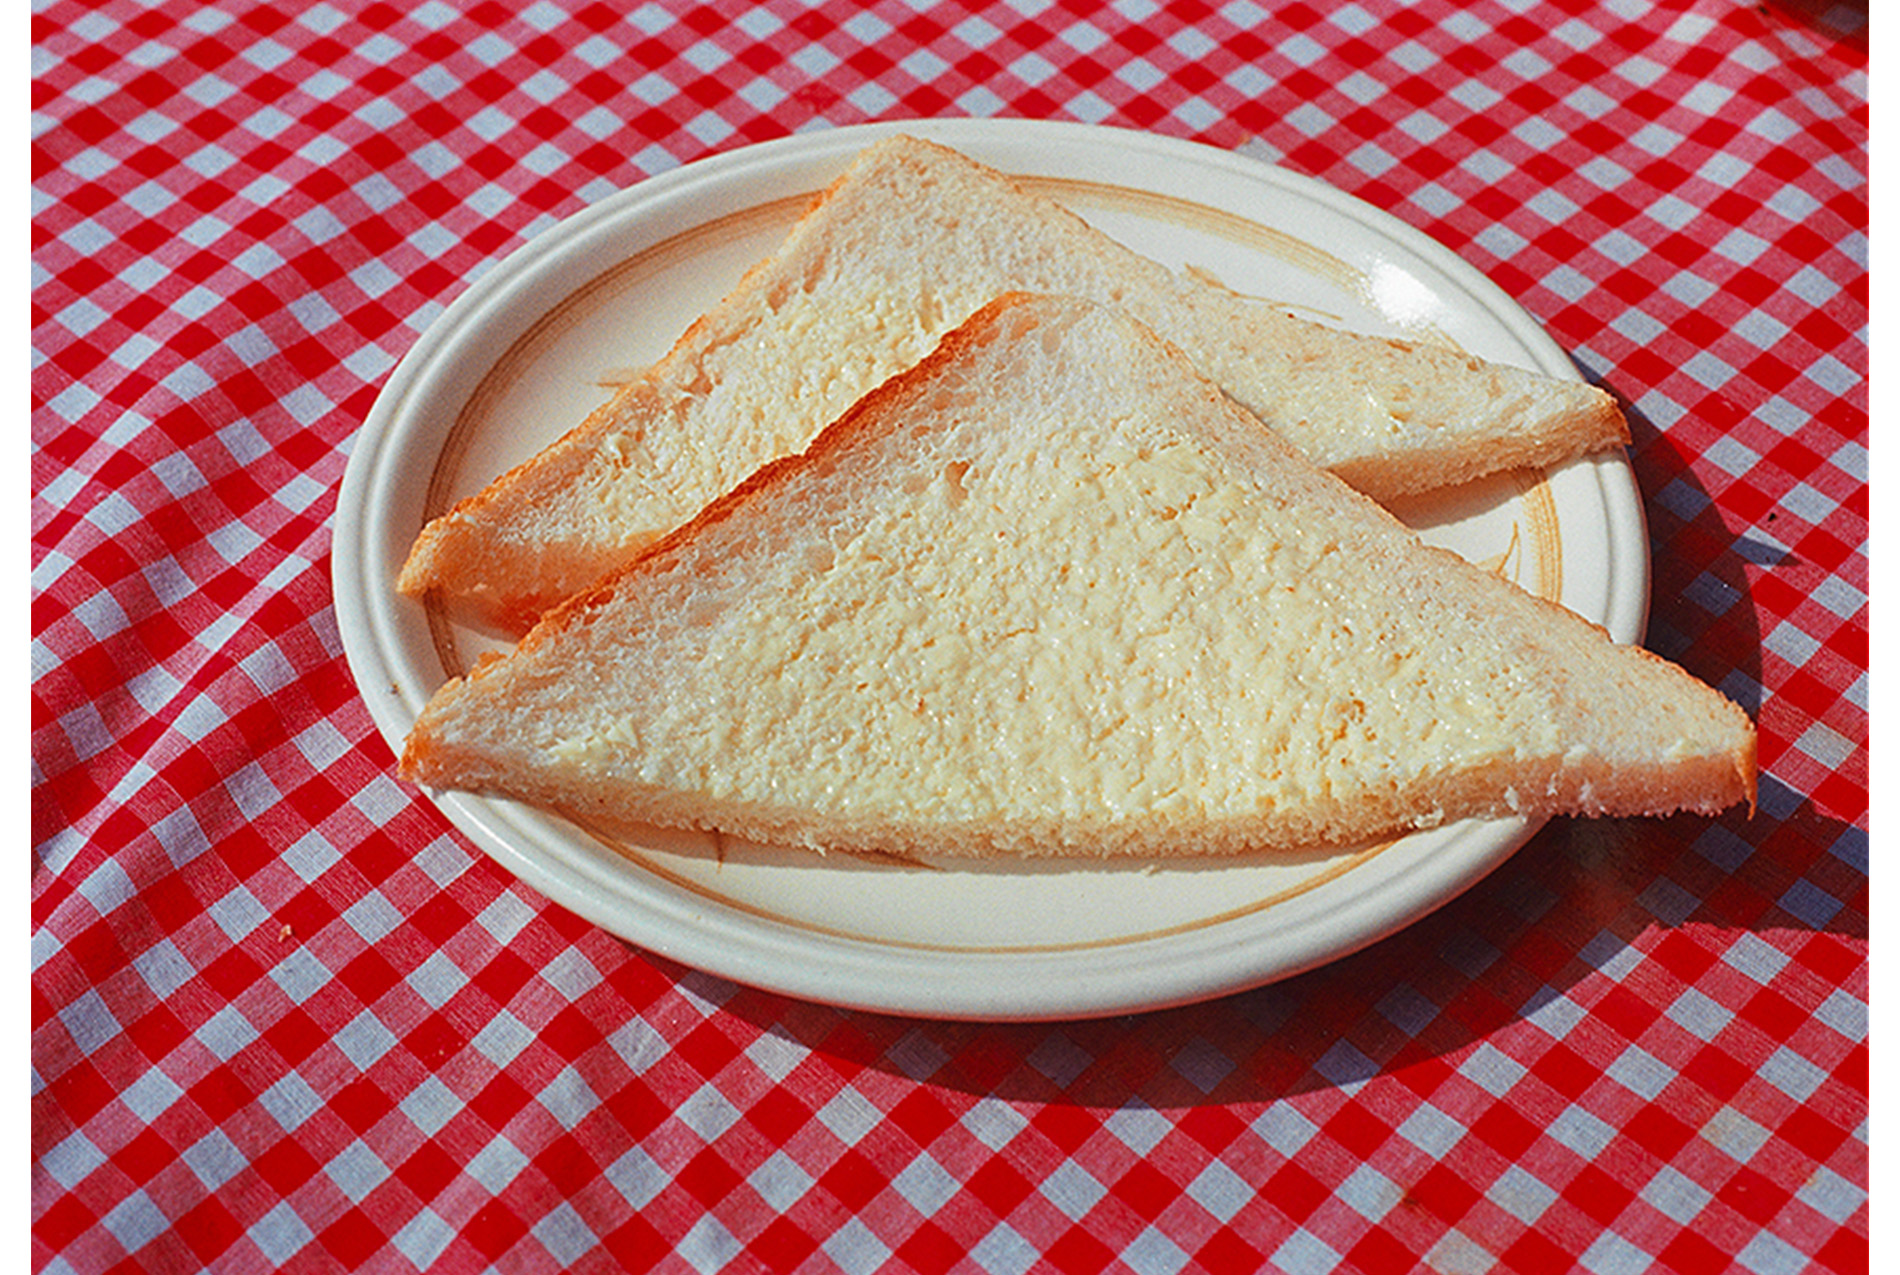 close-up of a table with a red and white checked cloth, white plate with gold band around inner edge holding two slices of thin white bread with spread with butter